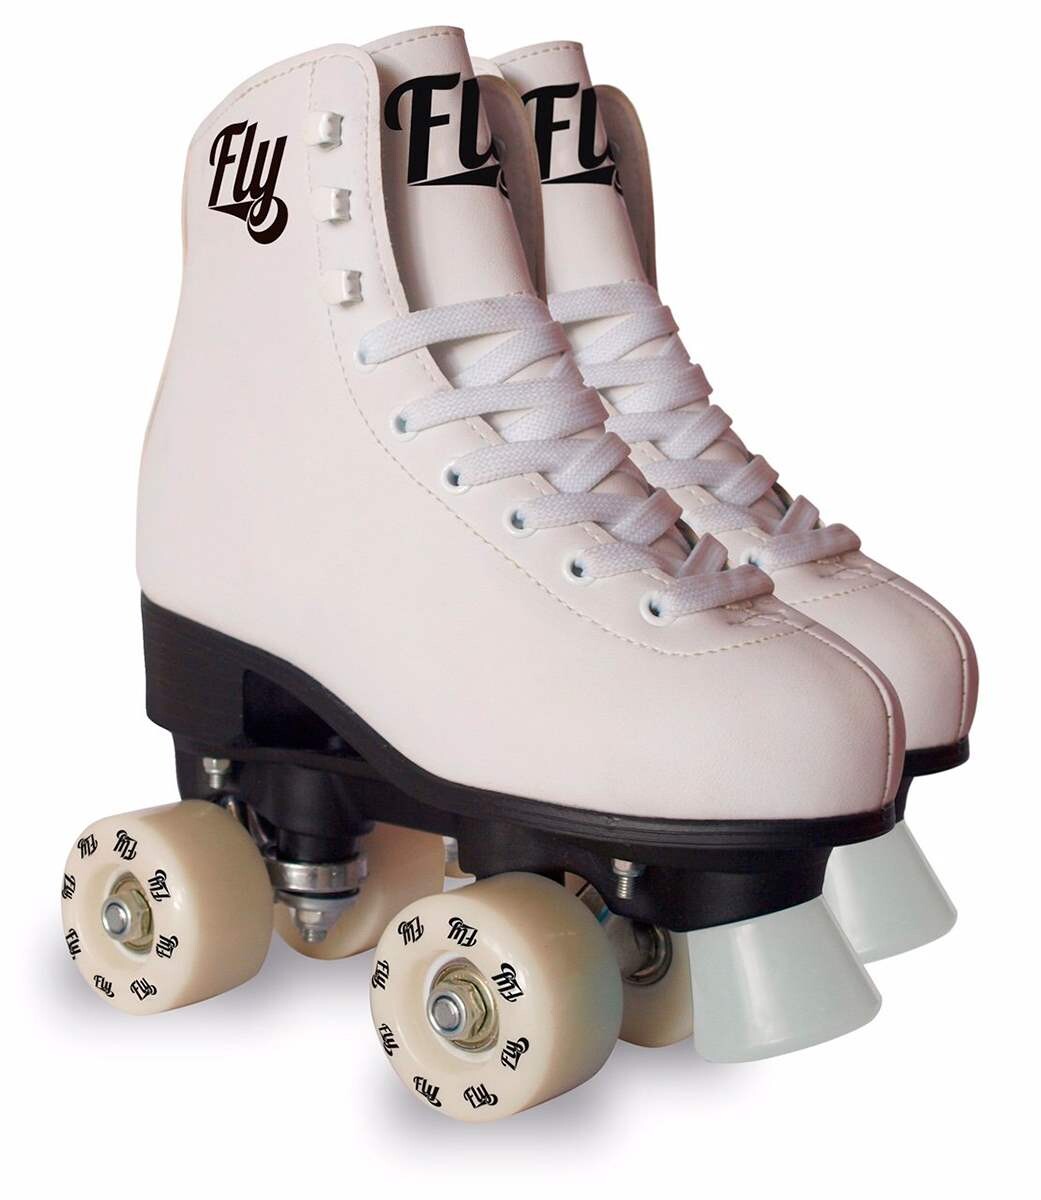 Patines Artisticos Talle 39 